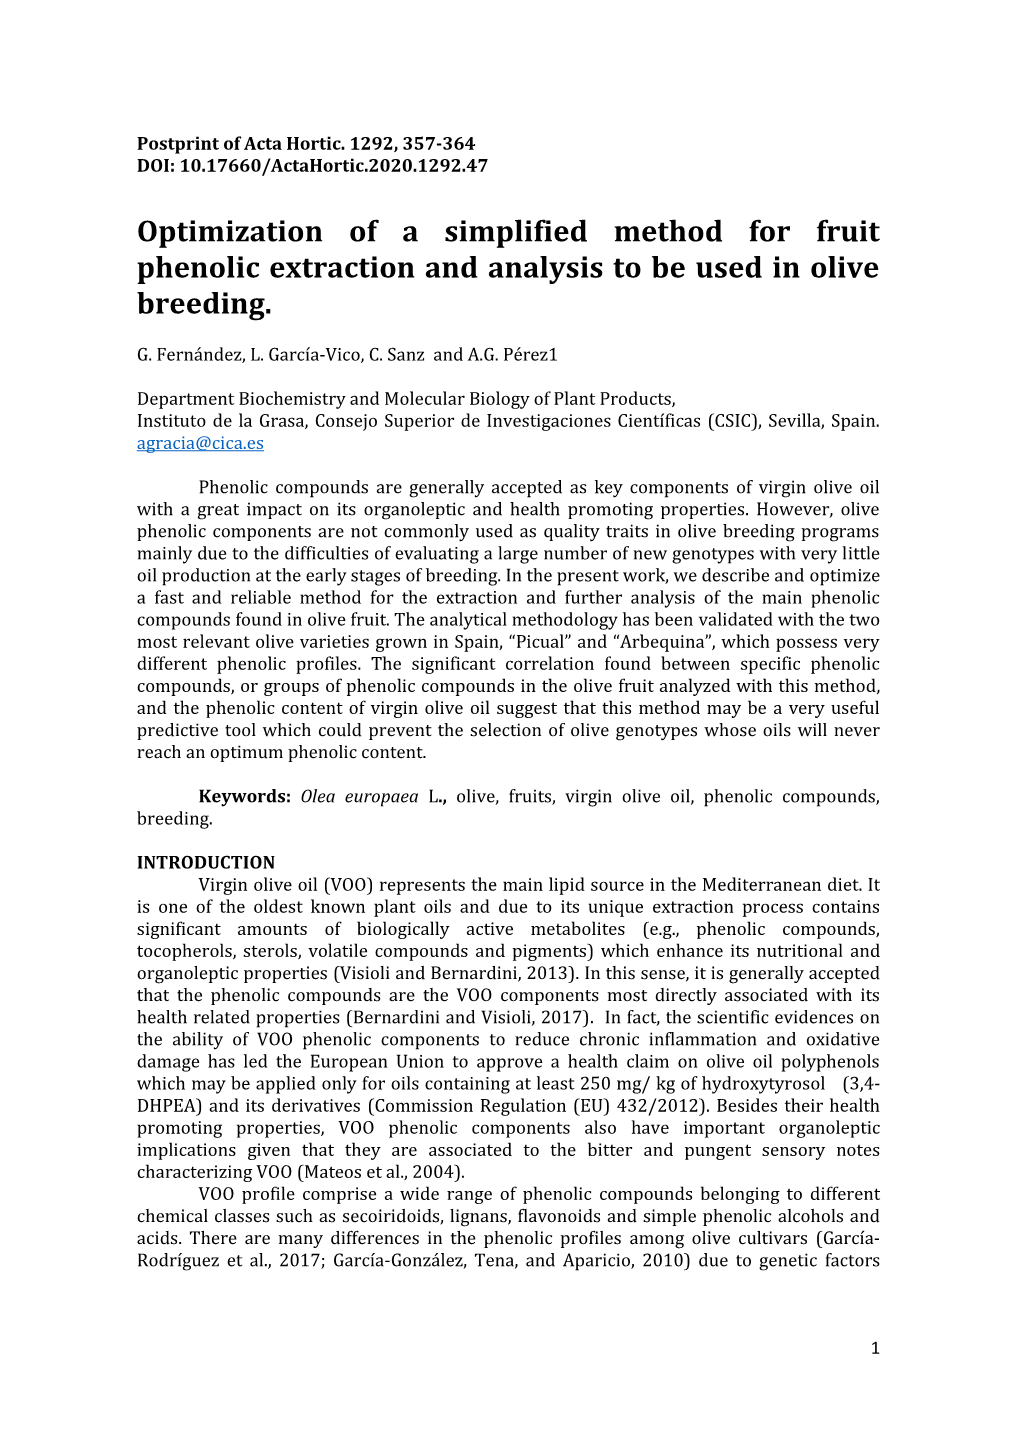 Optimization of a Simplified Method for Fruit Phenolic Extraction and Analysis to Be Used in Olive Breeding